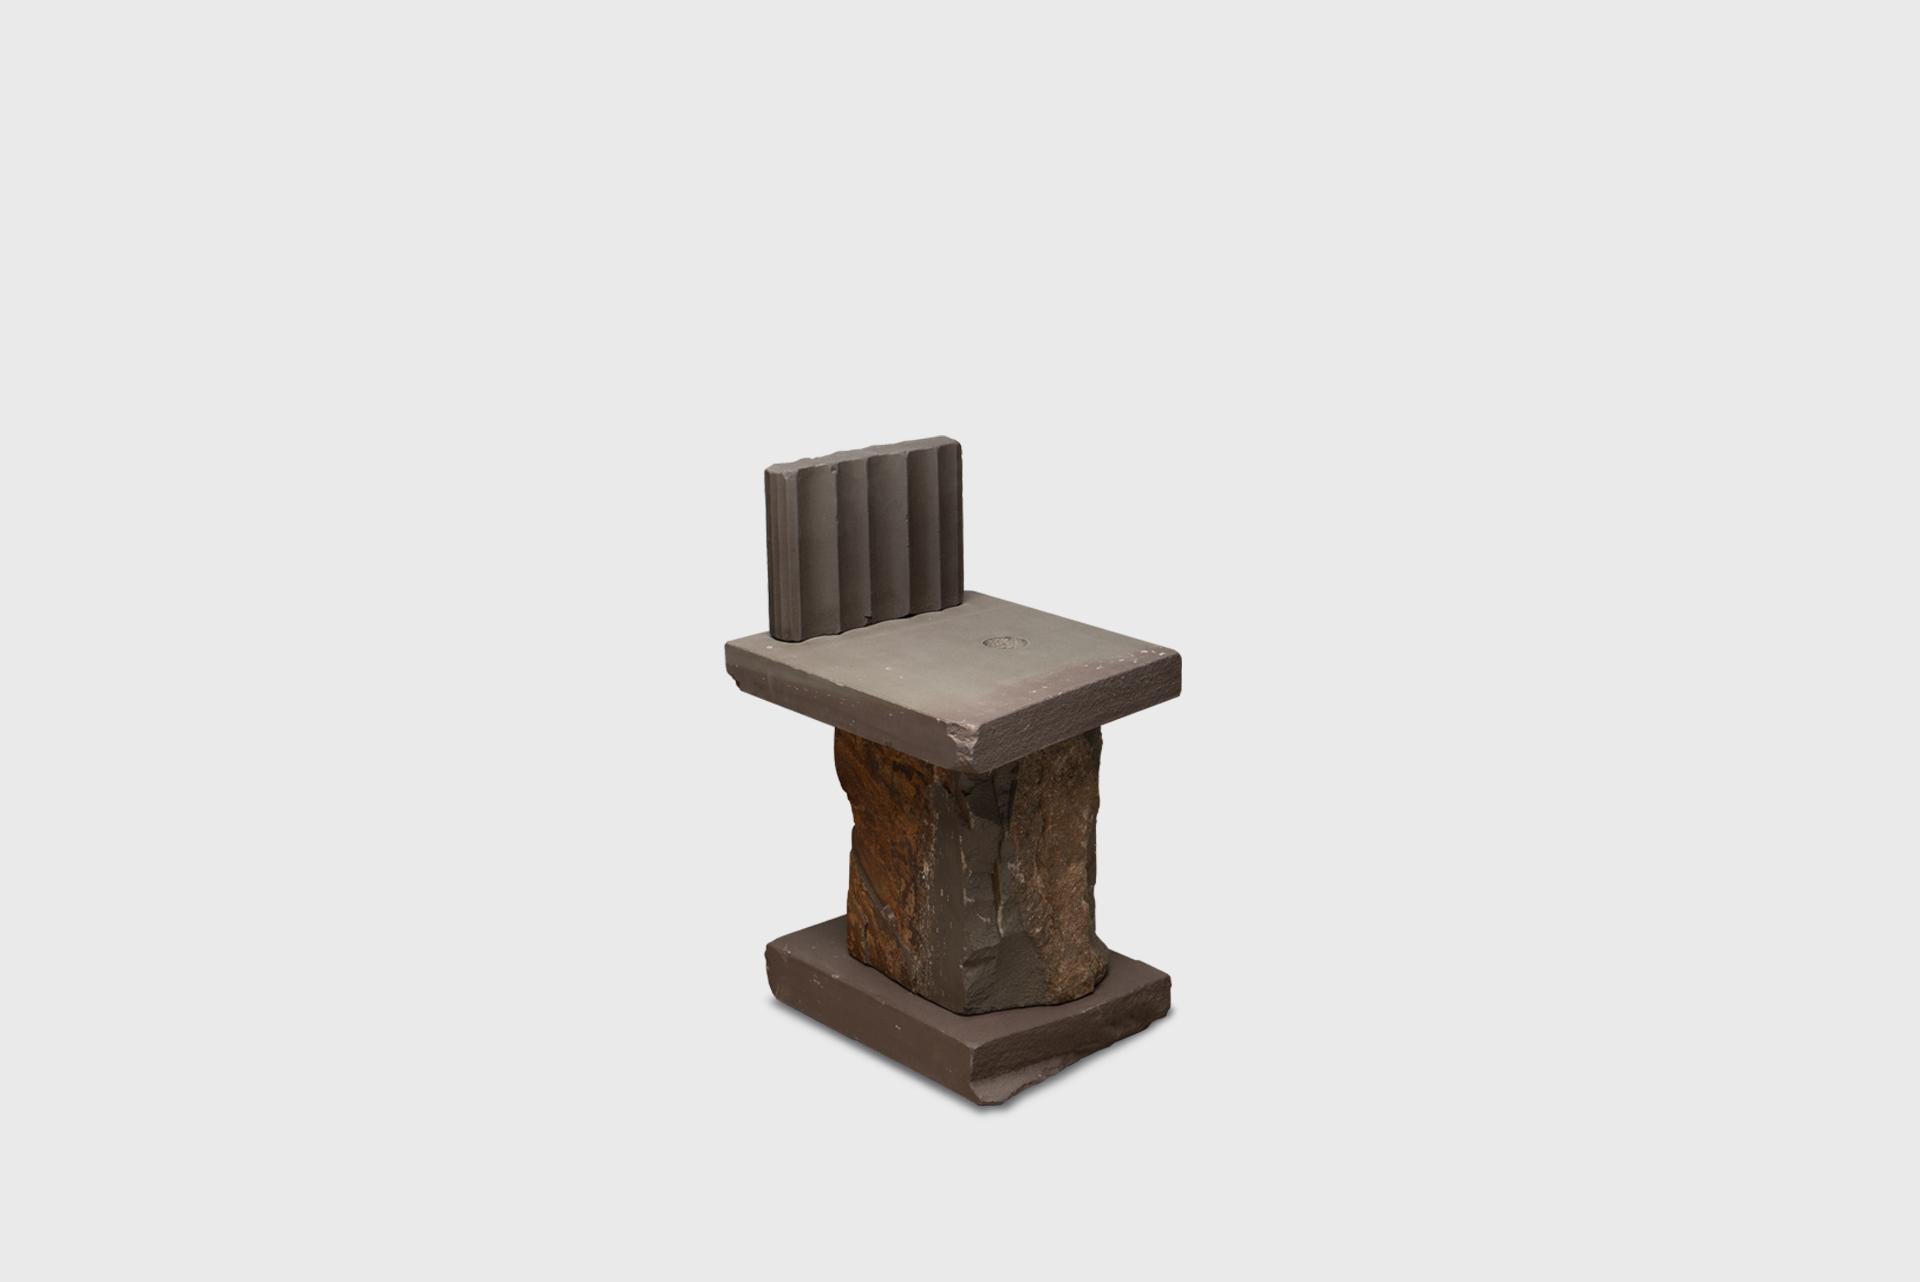 Contemporary Natural Chair 19, Graywacke Offcut Gray Stone, Carsten in Der Elst For Sale 5